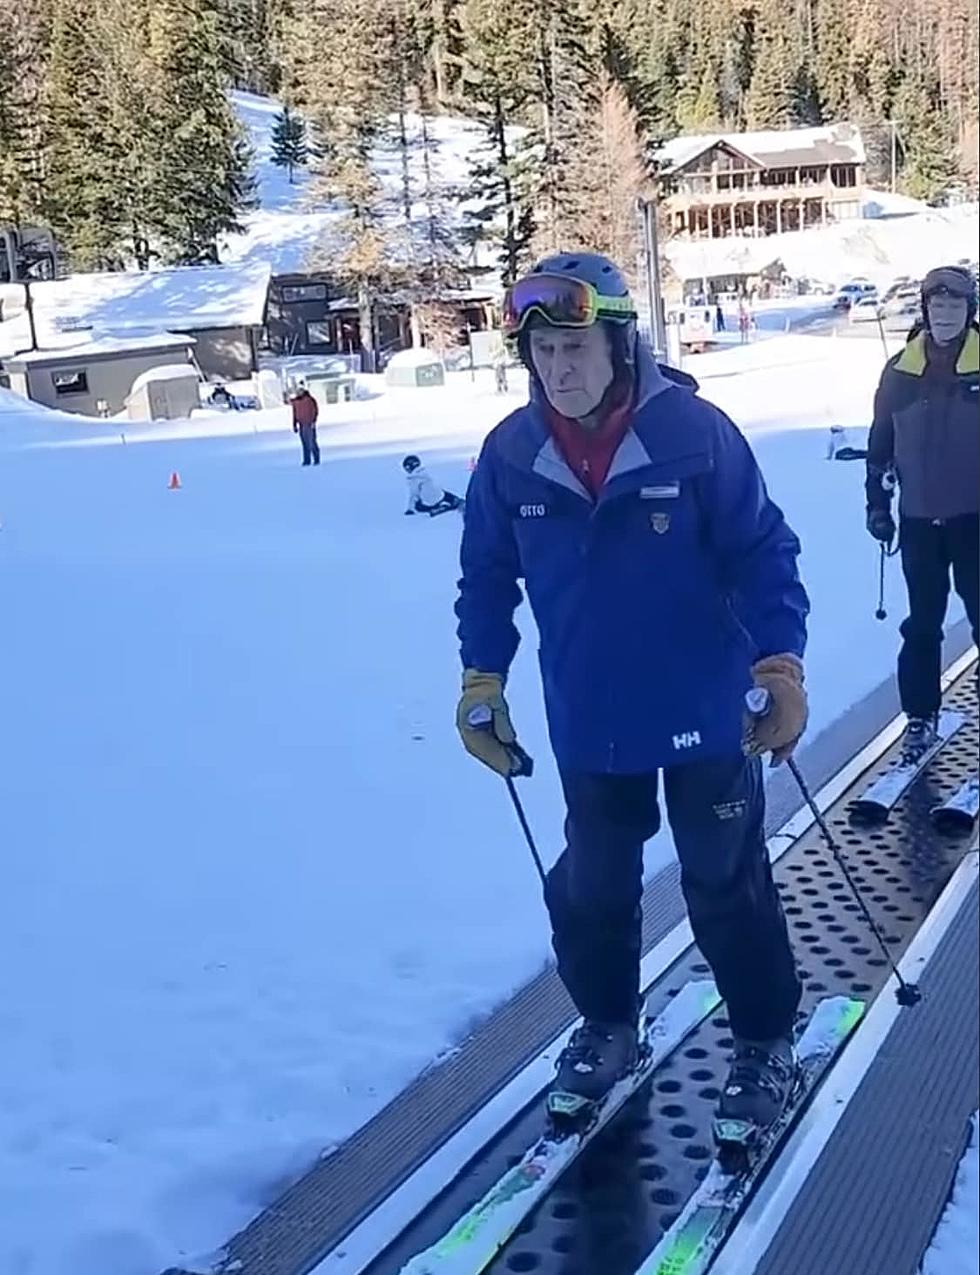 Mission Ridge Ski Instructor – Back for His 72nd Year!